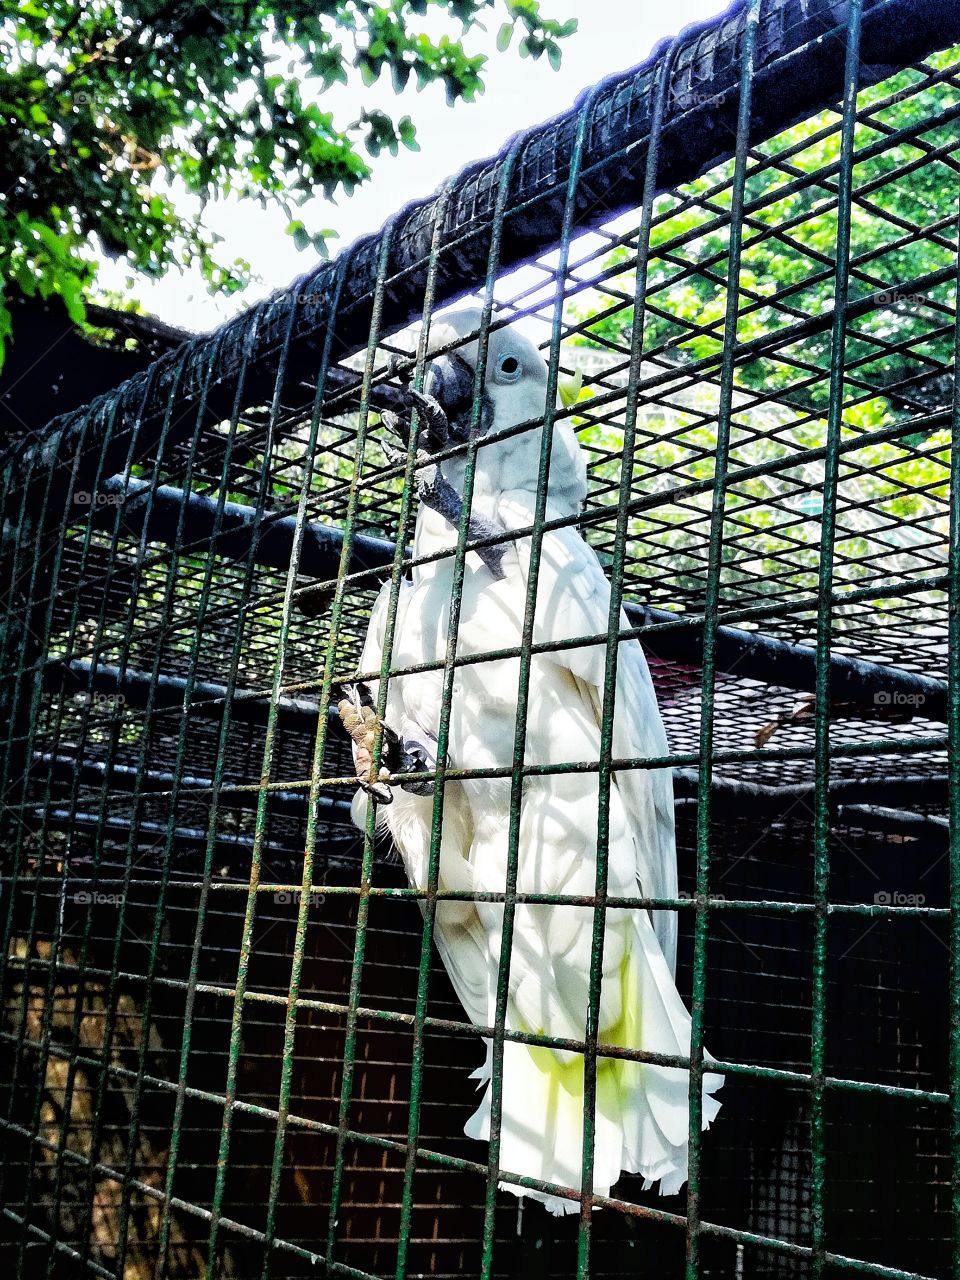 Why do they need to locked up bird in a cage for people to see it? ☹️🙁☹️ Poor beautiful creature. ☹️